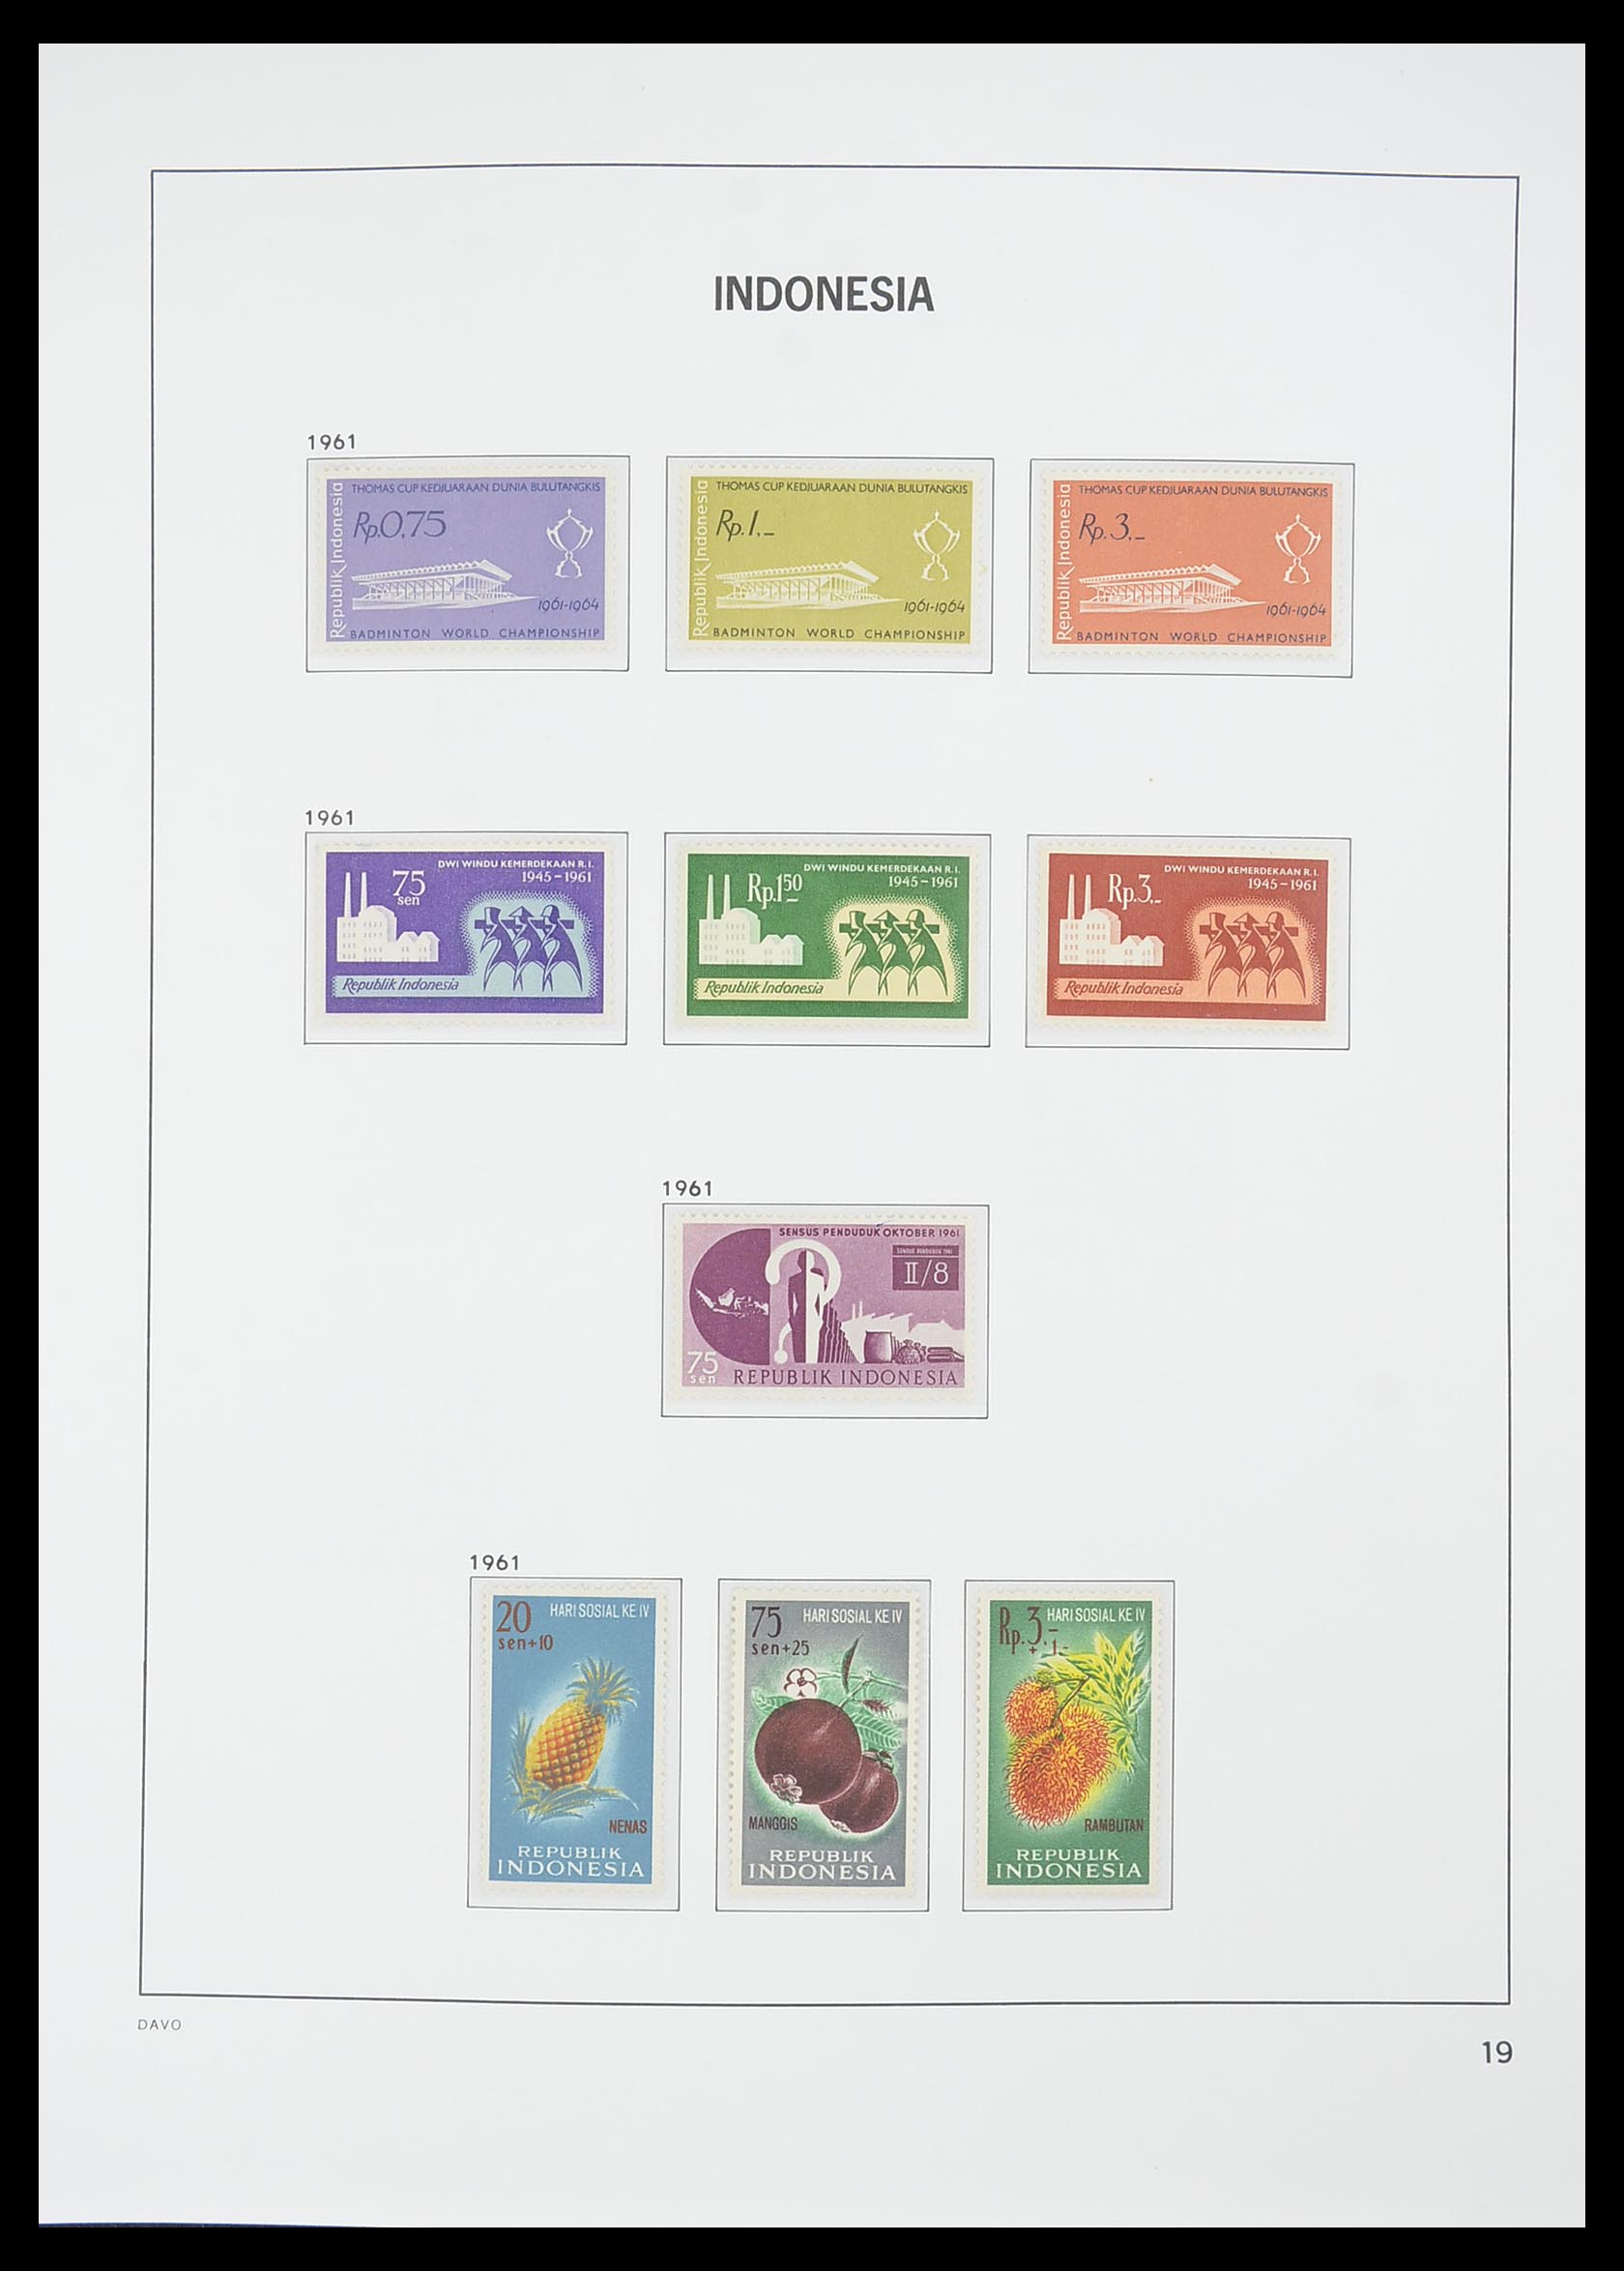 33777 021 - Stamp collection 33777 Indonesia 1949-1969.